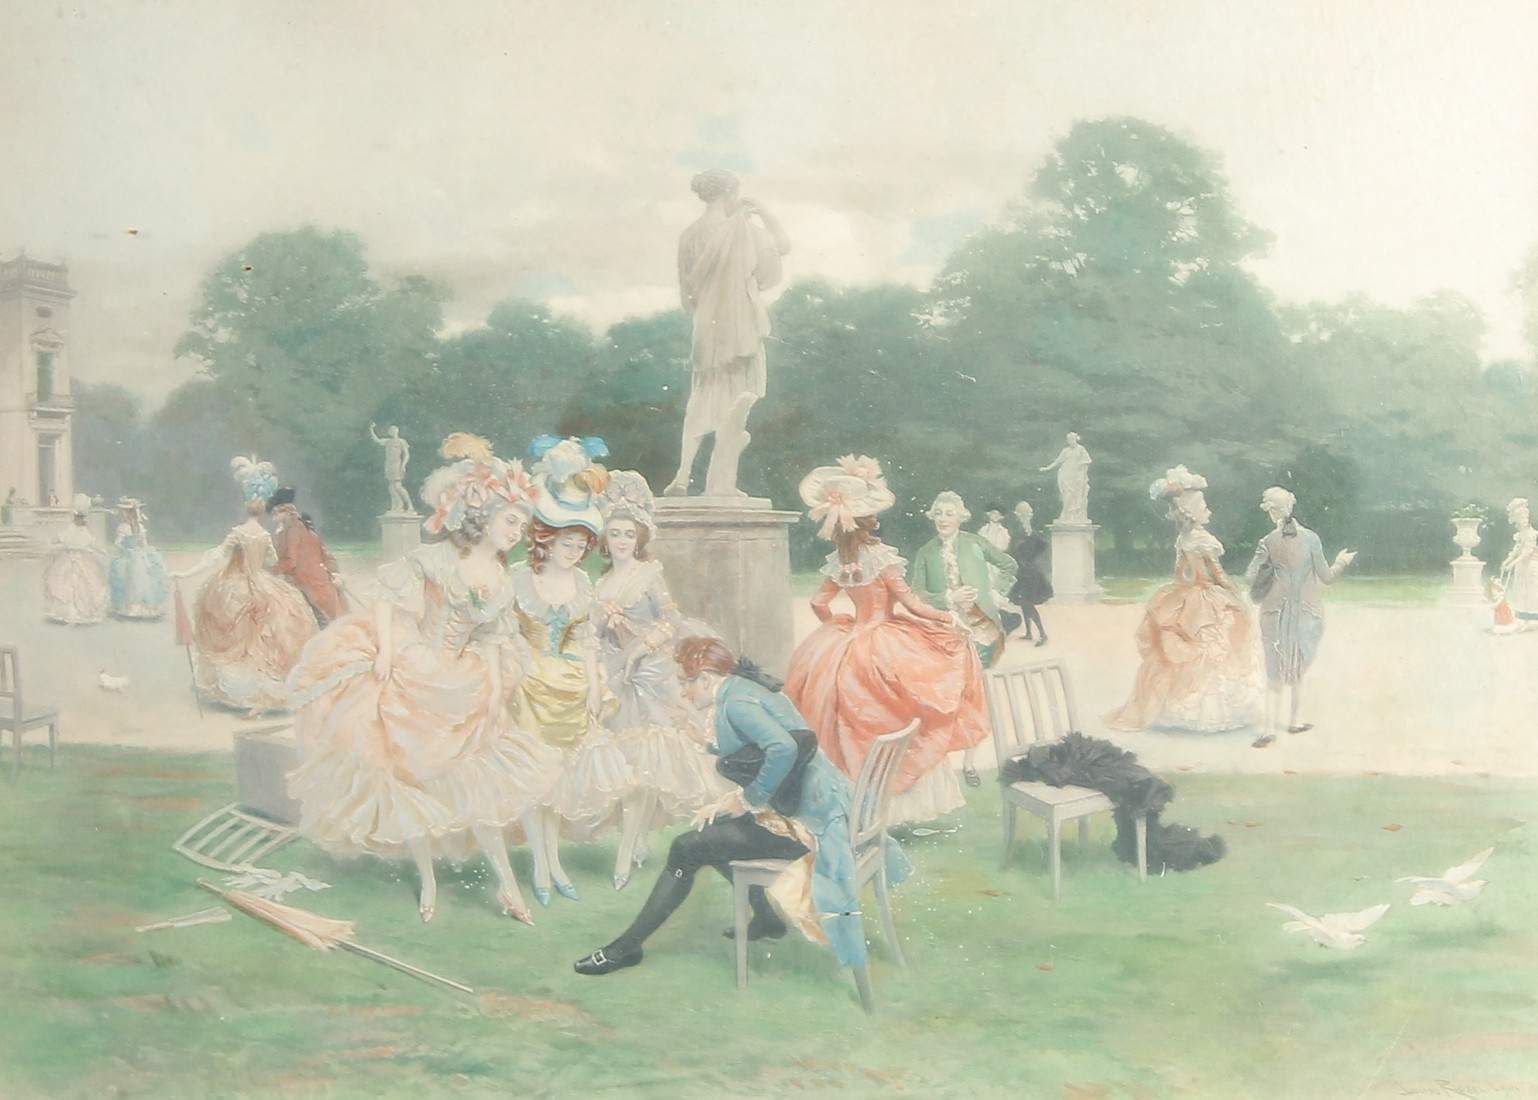 After Lucius Rossi, A chromo lithograph print, Ladies and gentlemen gathered in a garden with marble